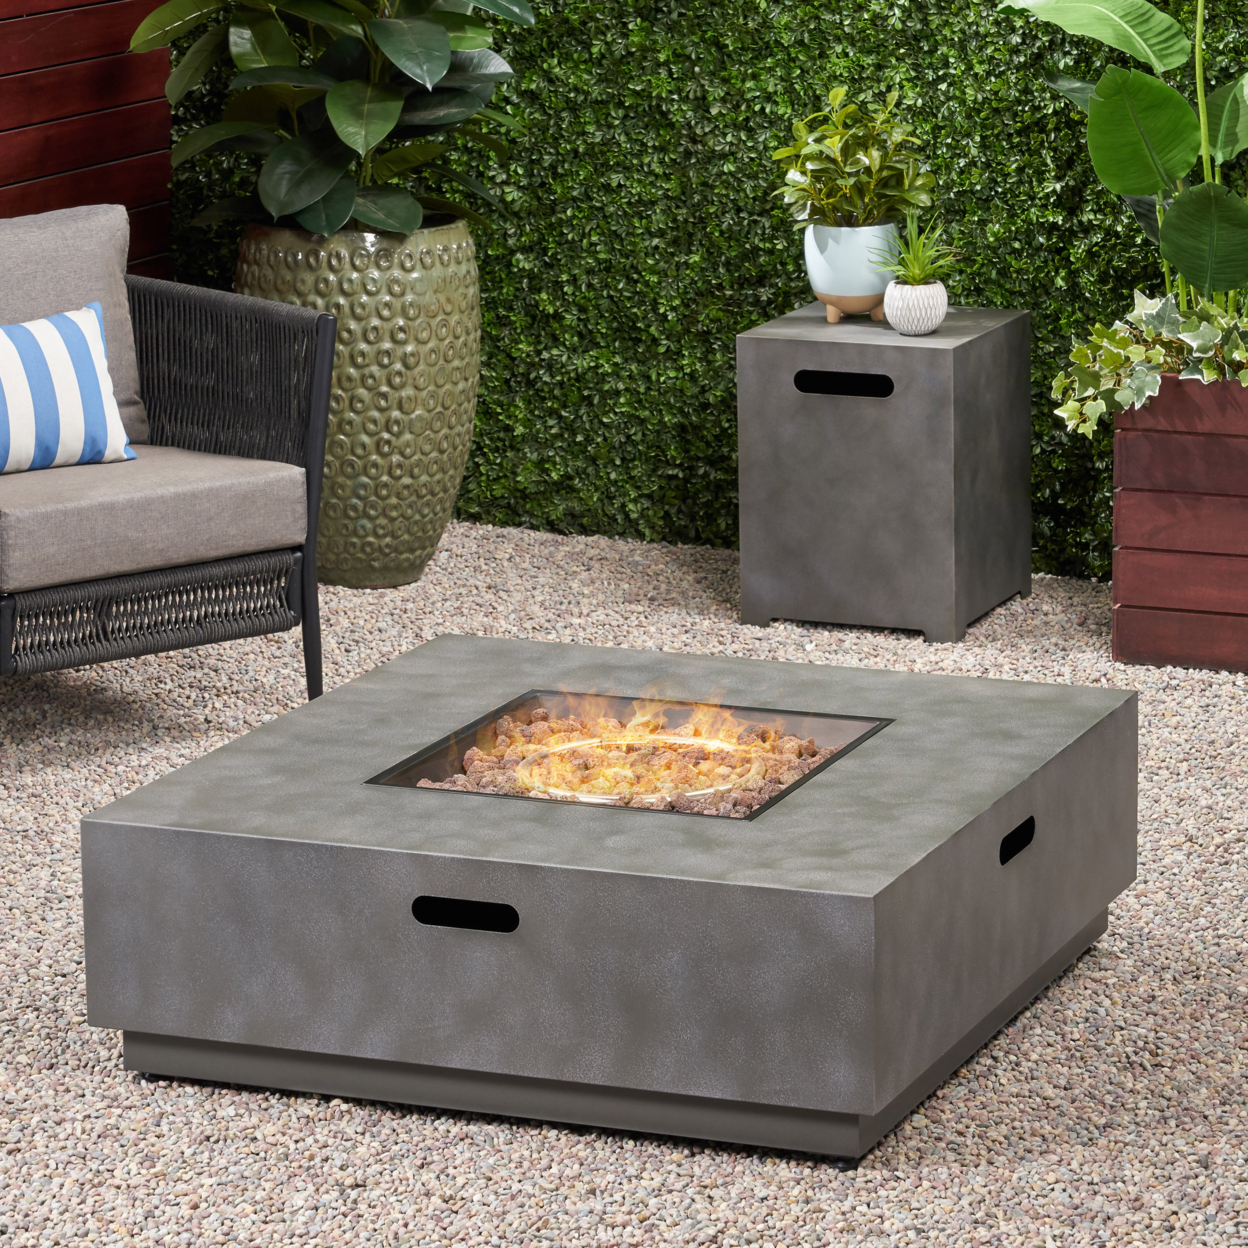 McKinley Outdoor 40-Inch Square Fire Pit With Tank Holder